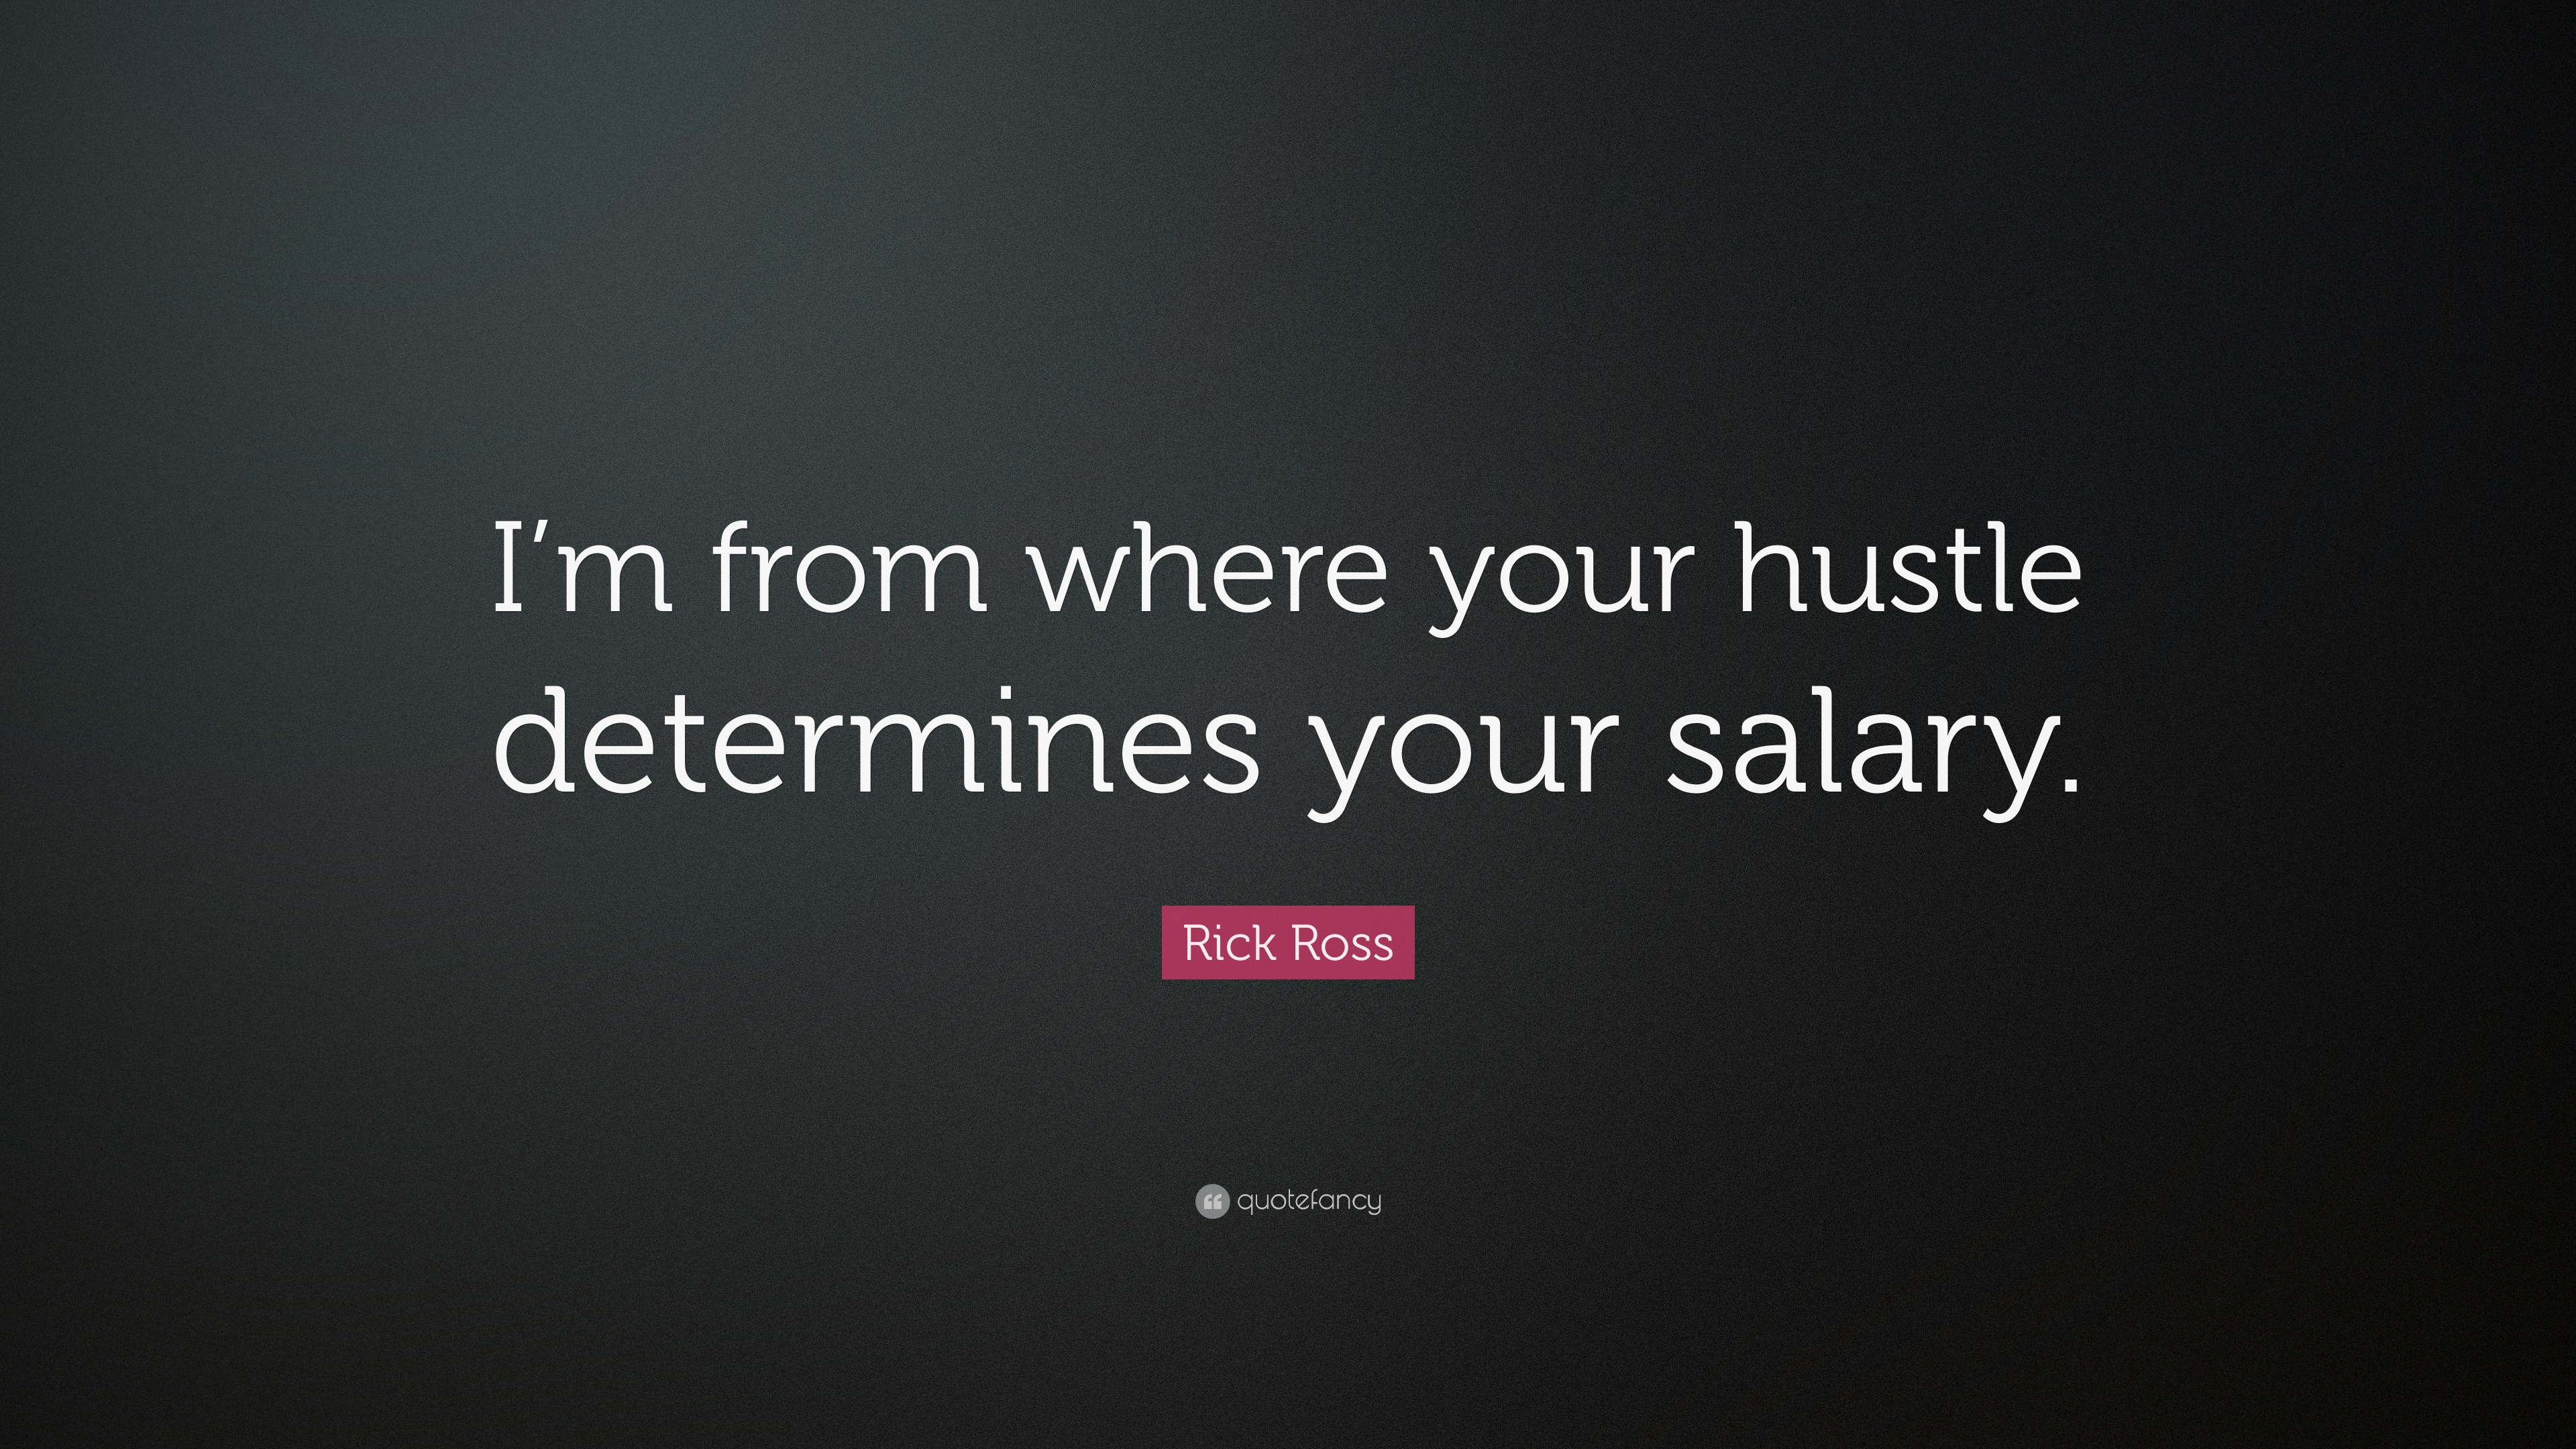 Rick Ross Quote: “I'm from where your hustle determines your salary.”